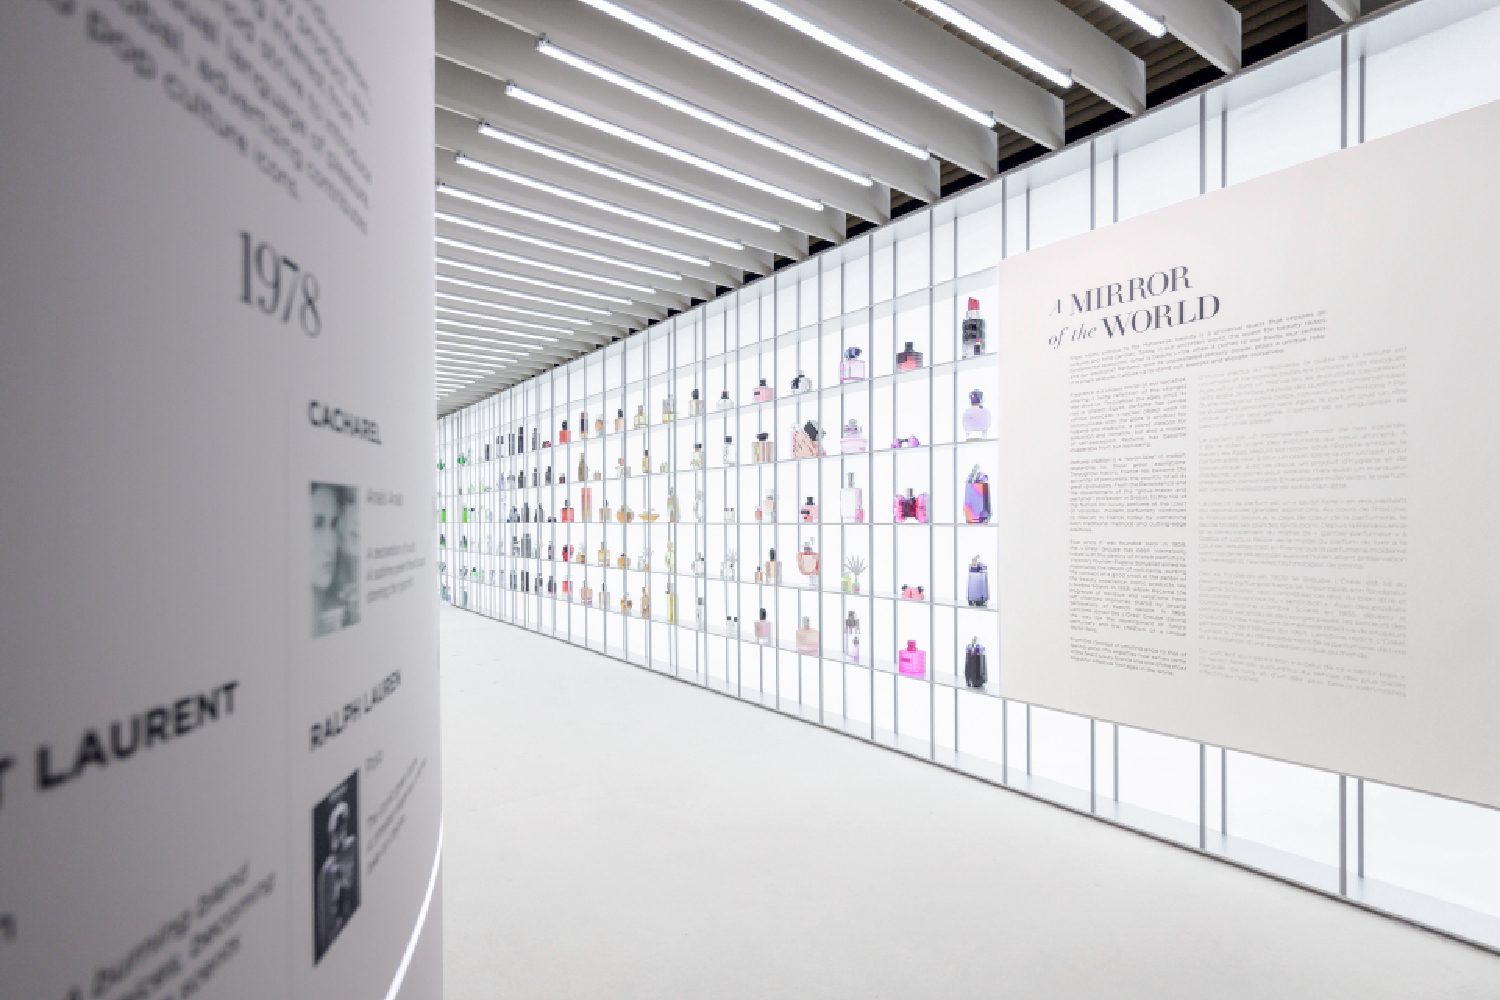 L’Oréal Science & The Art of Fragrance exhibition